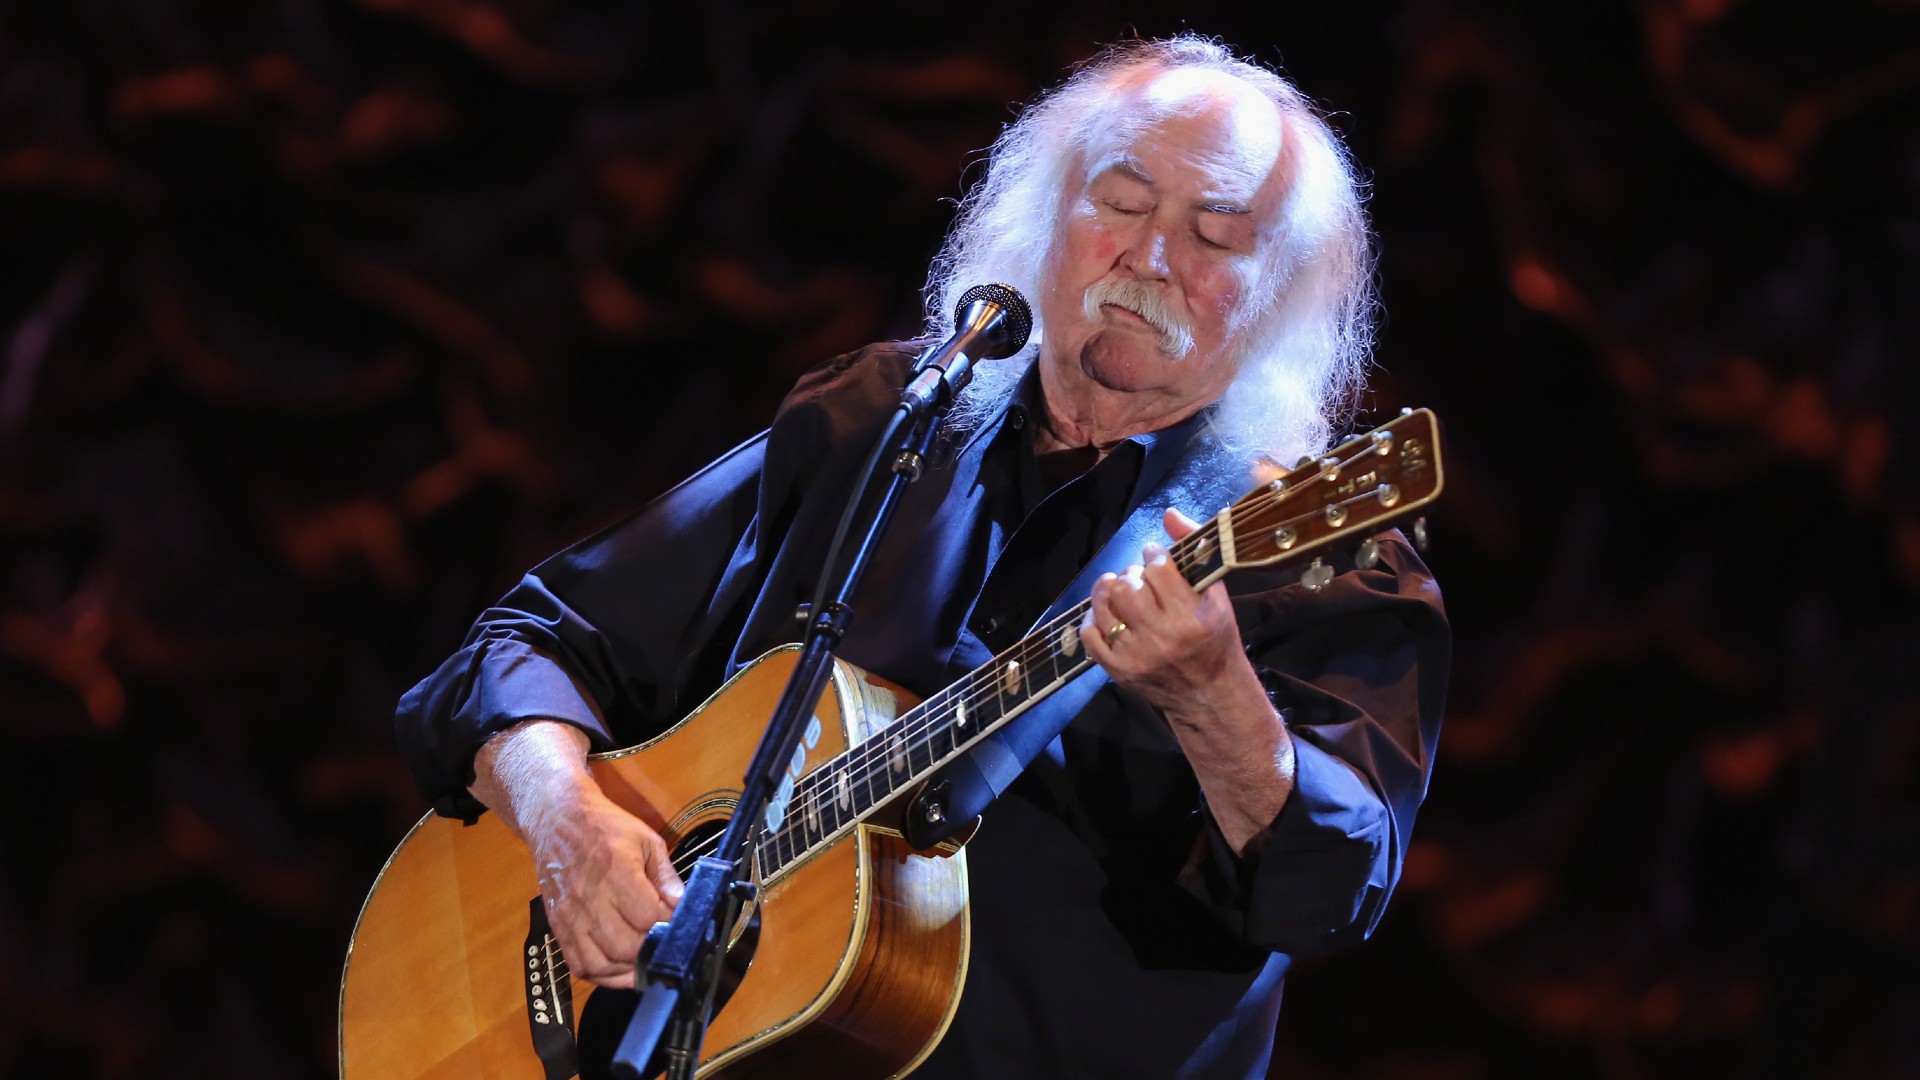 Legendary singer-songwriter David Crosby has died at the age of 81